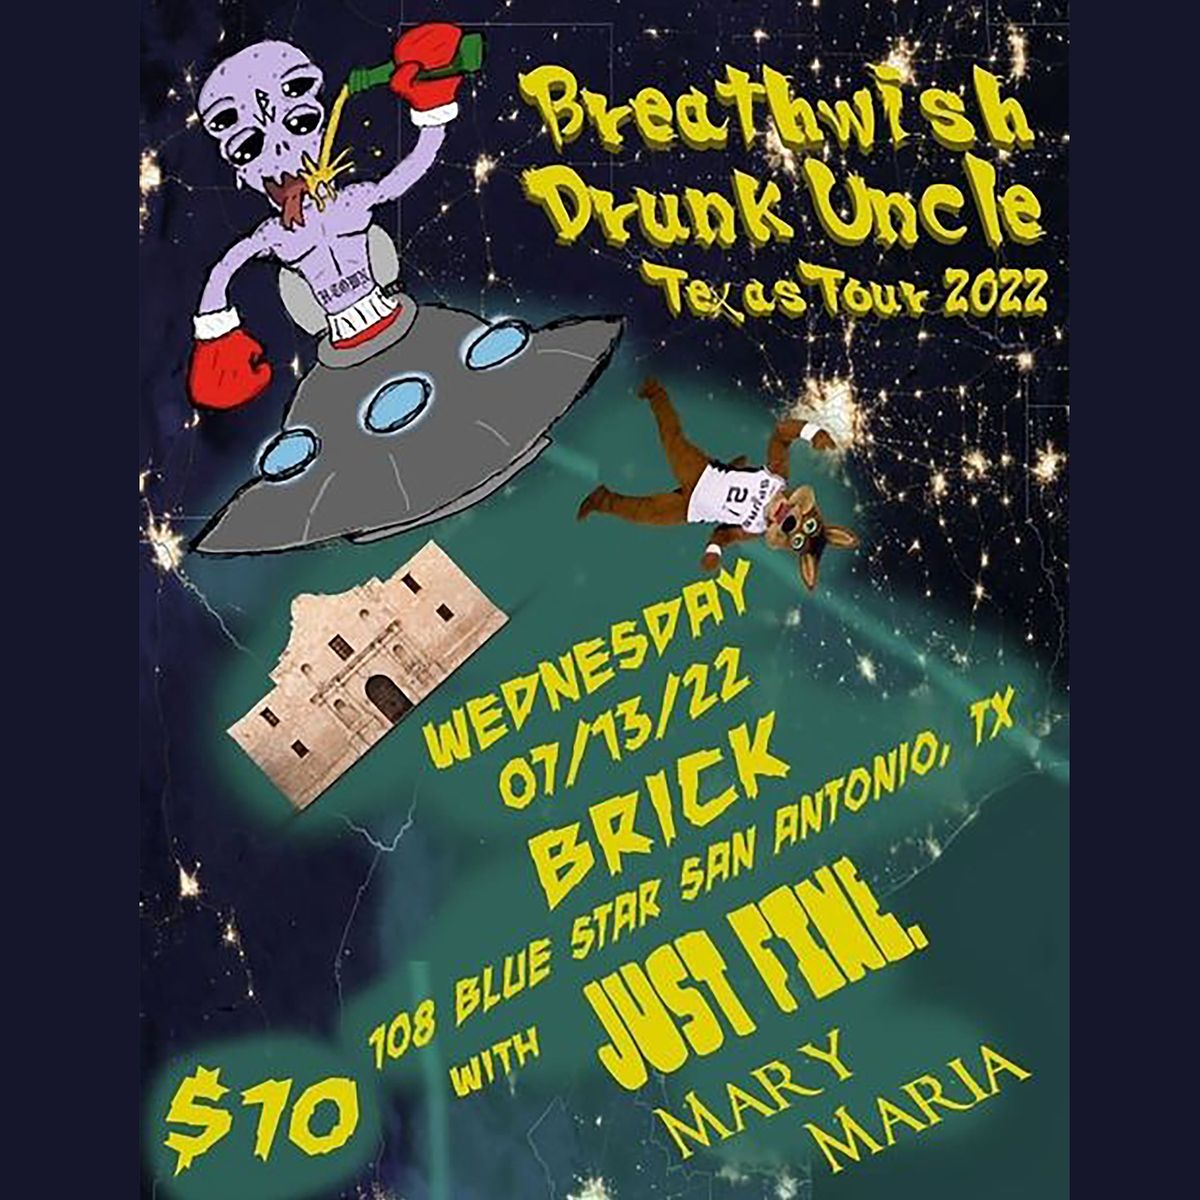 BREATHWISH + DRUNK UNCLE TX TOUR with Friends!!